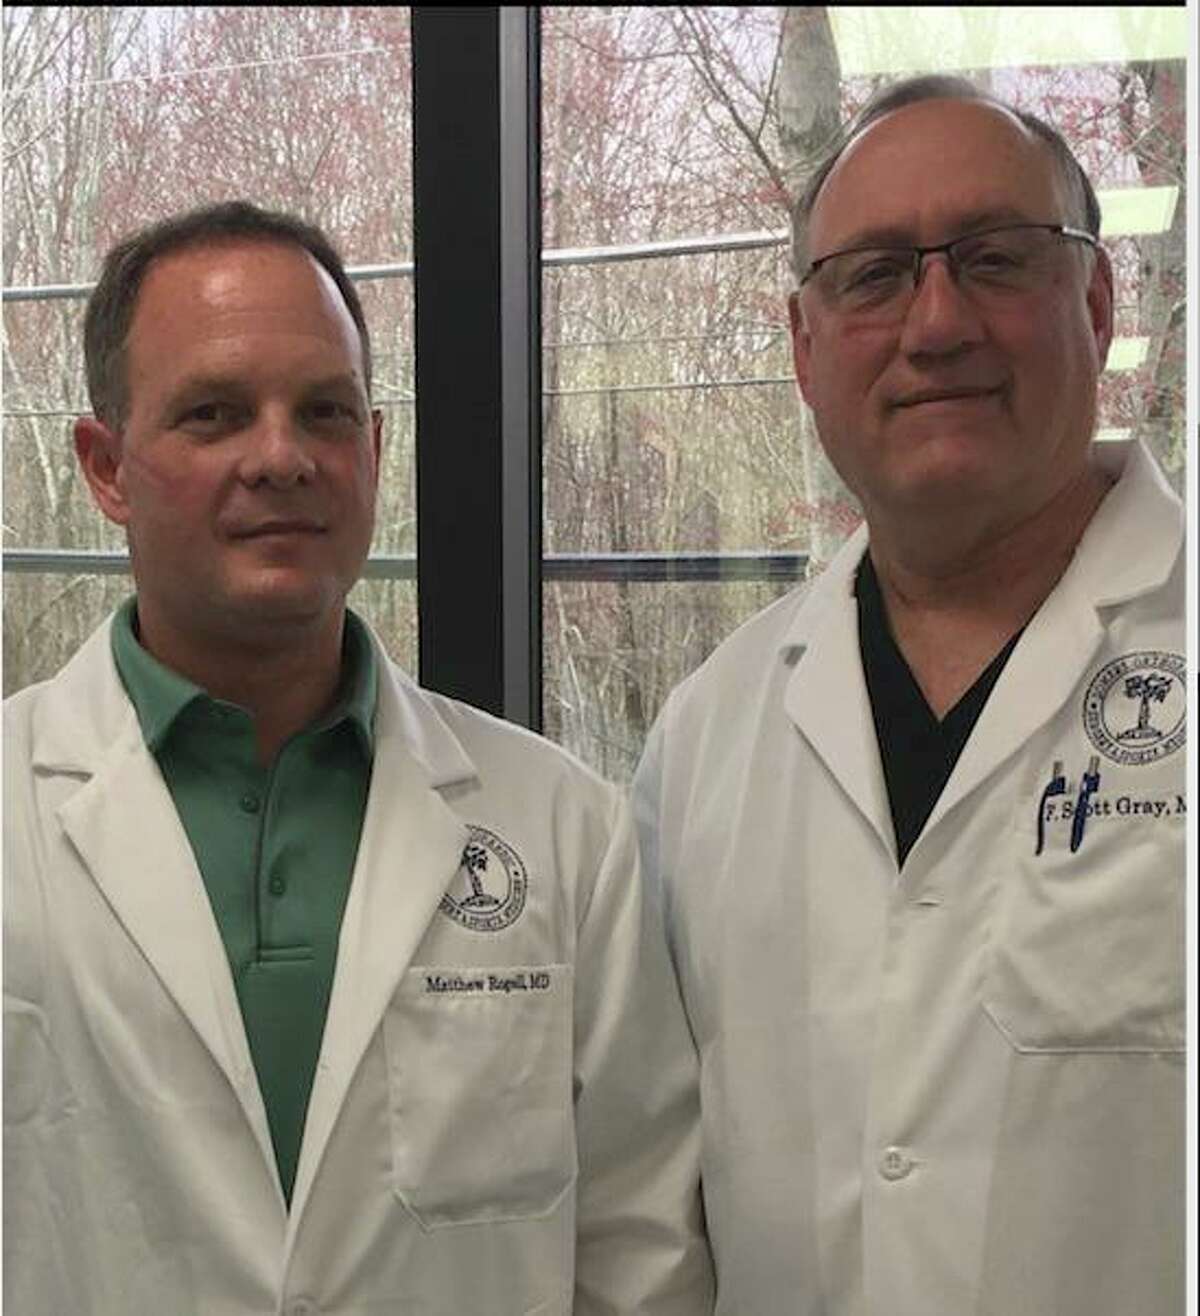 Dr. F. Scott Gray and Dr. Matthew Rogell